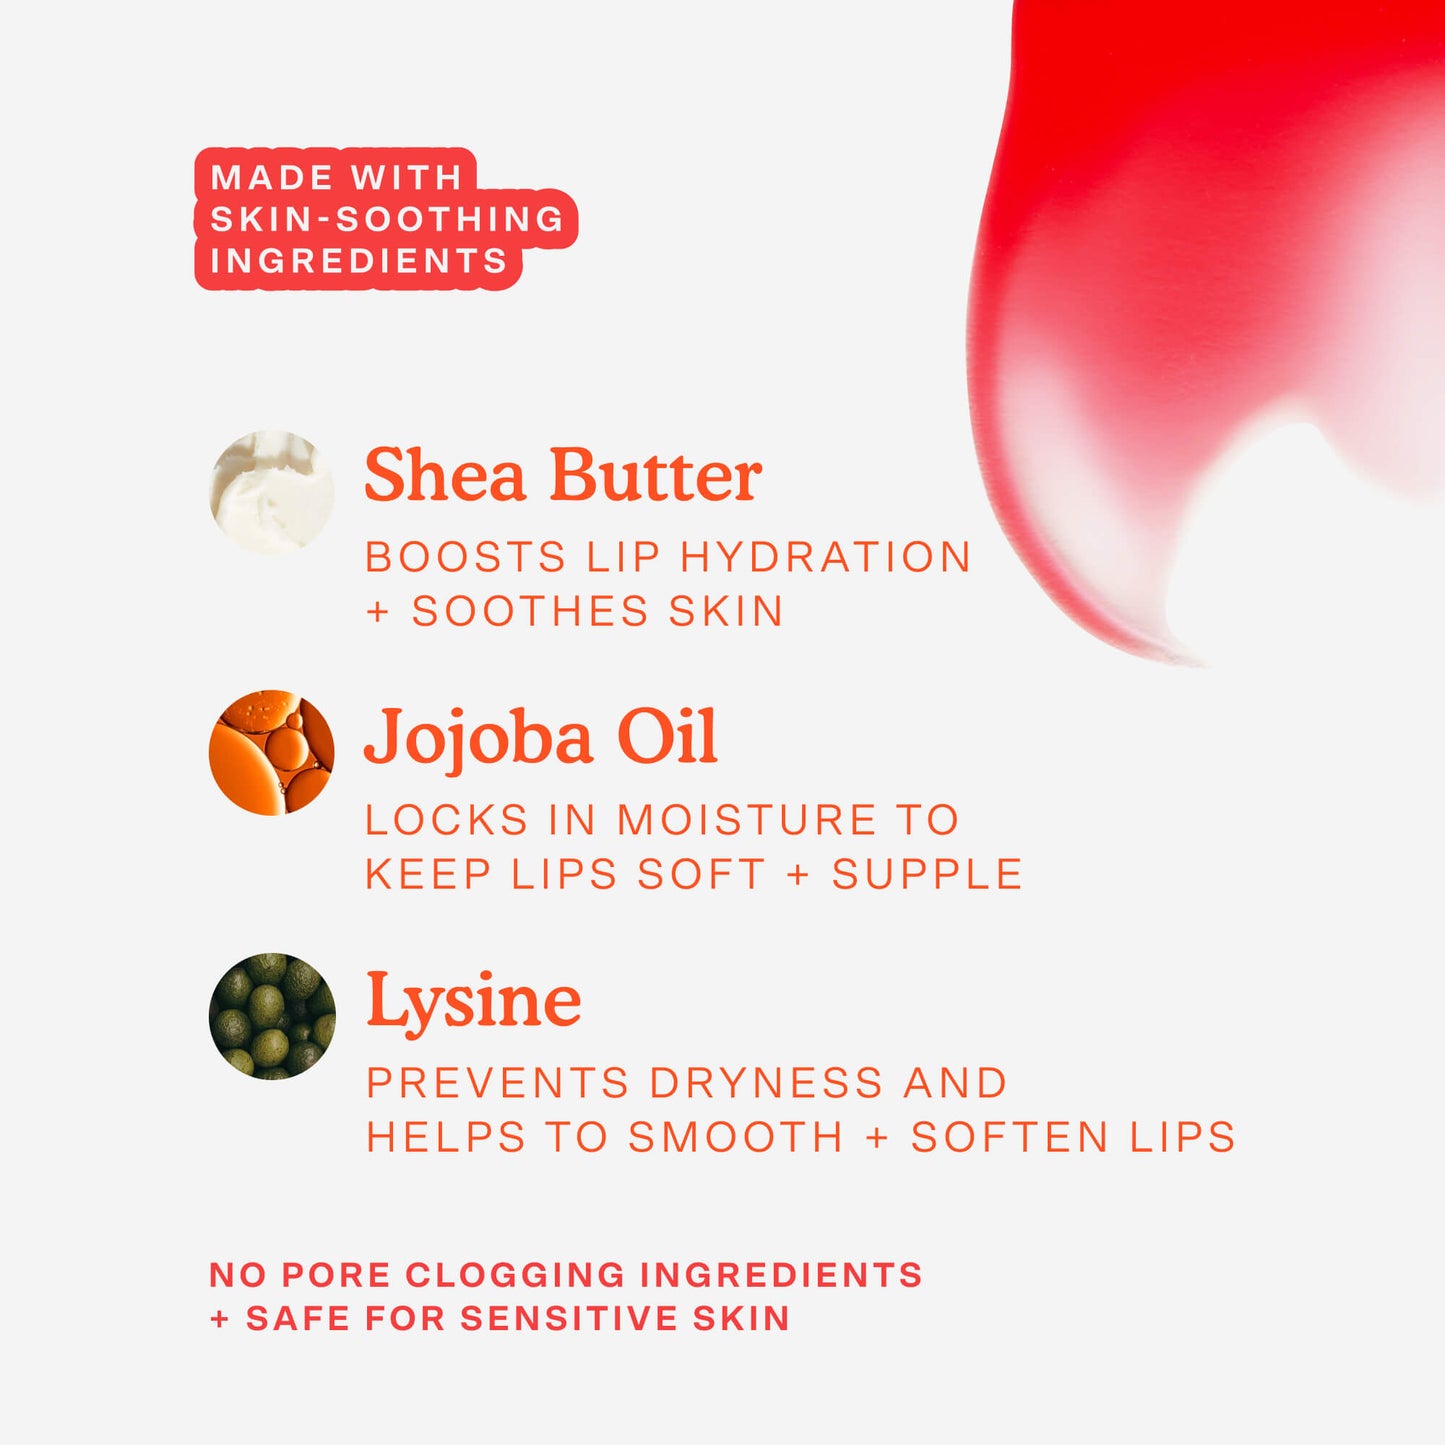 [The key ingredients of Tower 28 Beauty LipSoftie™ Lip Treatment Blood Orange Vanilla listed out]